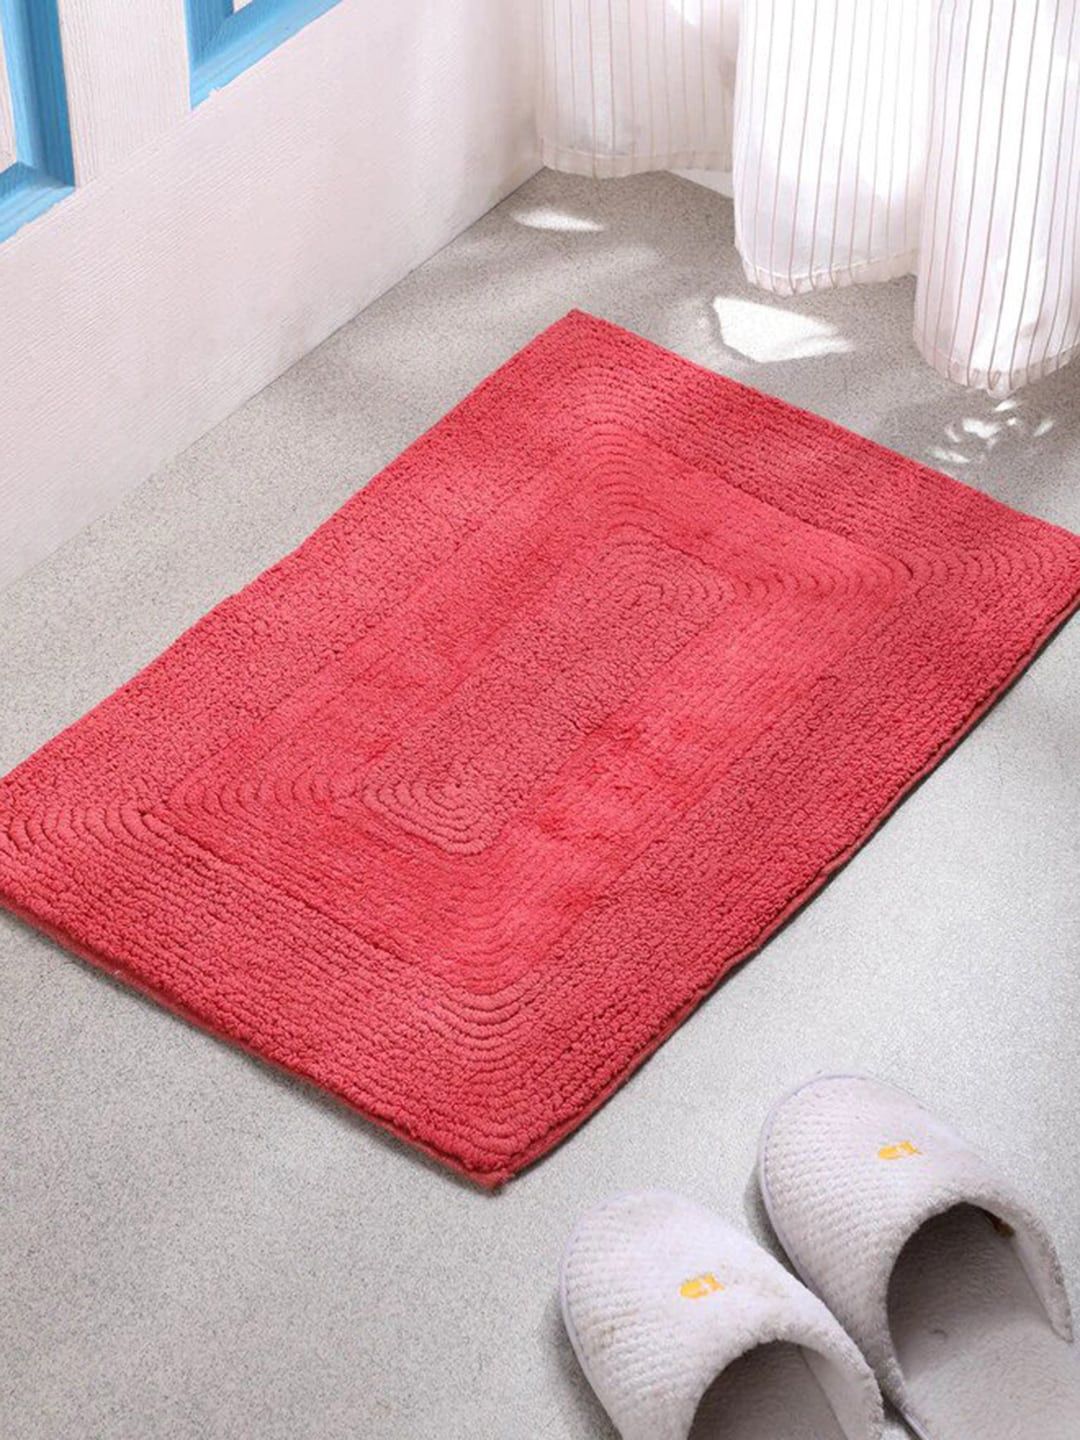 Gallery99 Red Solid Cotton Anti-Skid Doormat Price in India